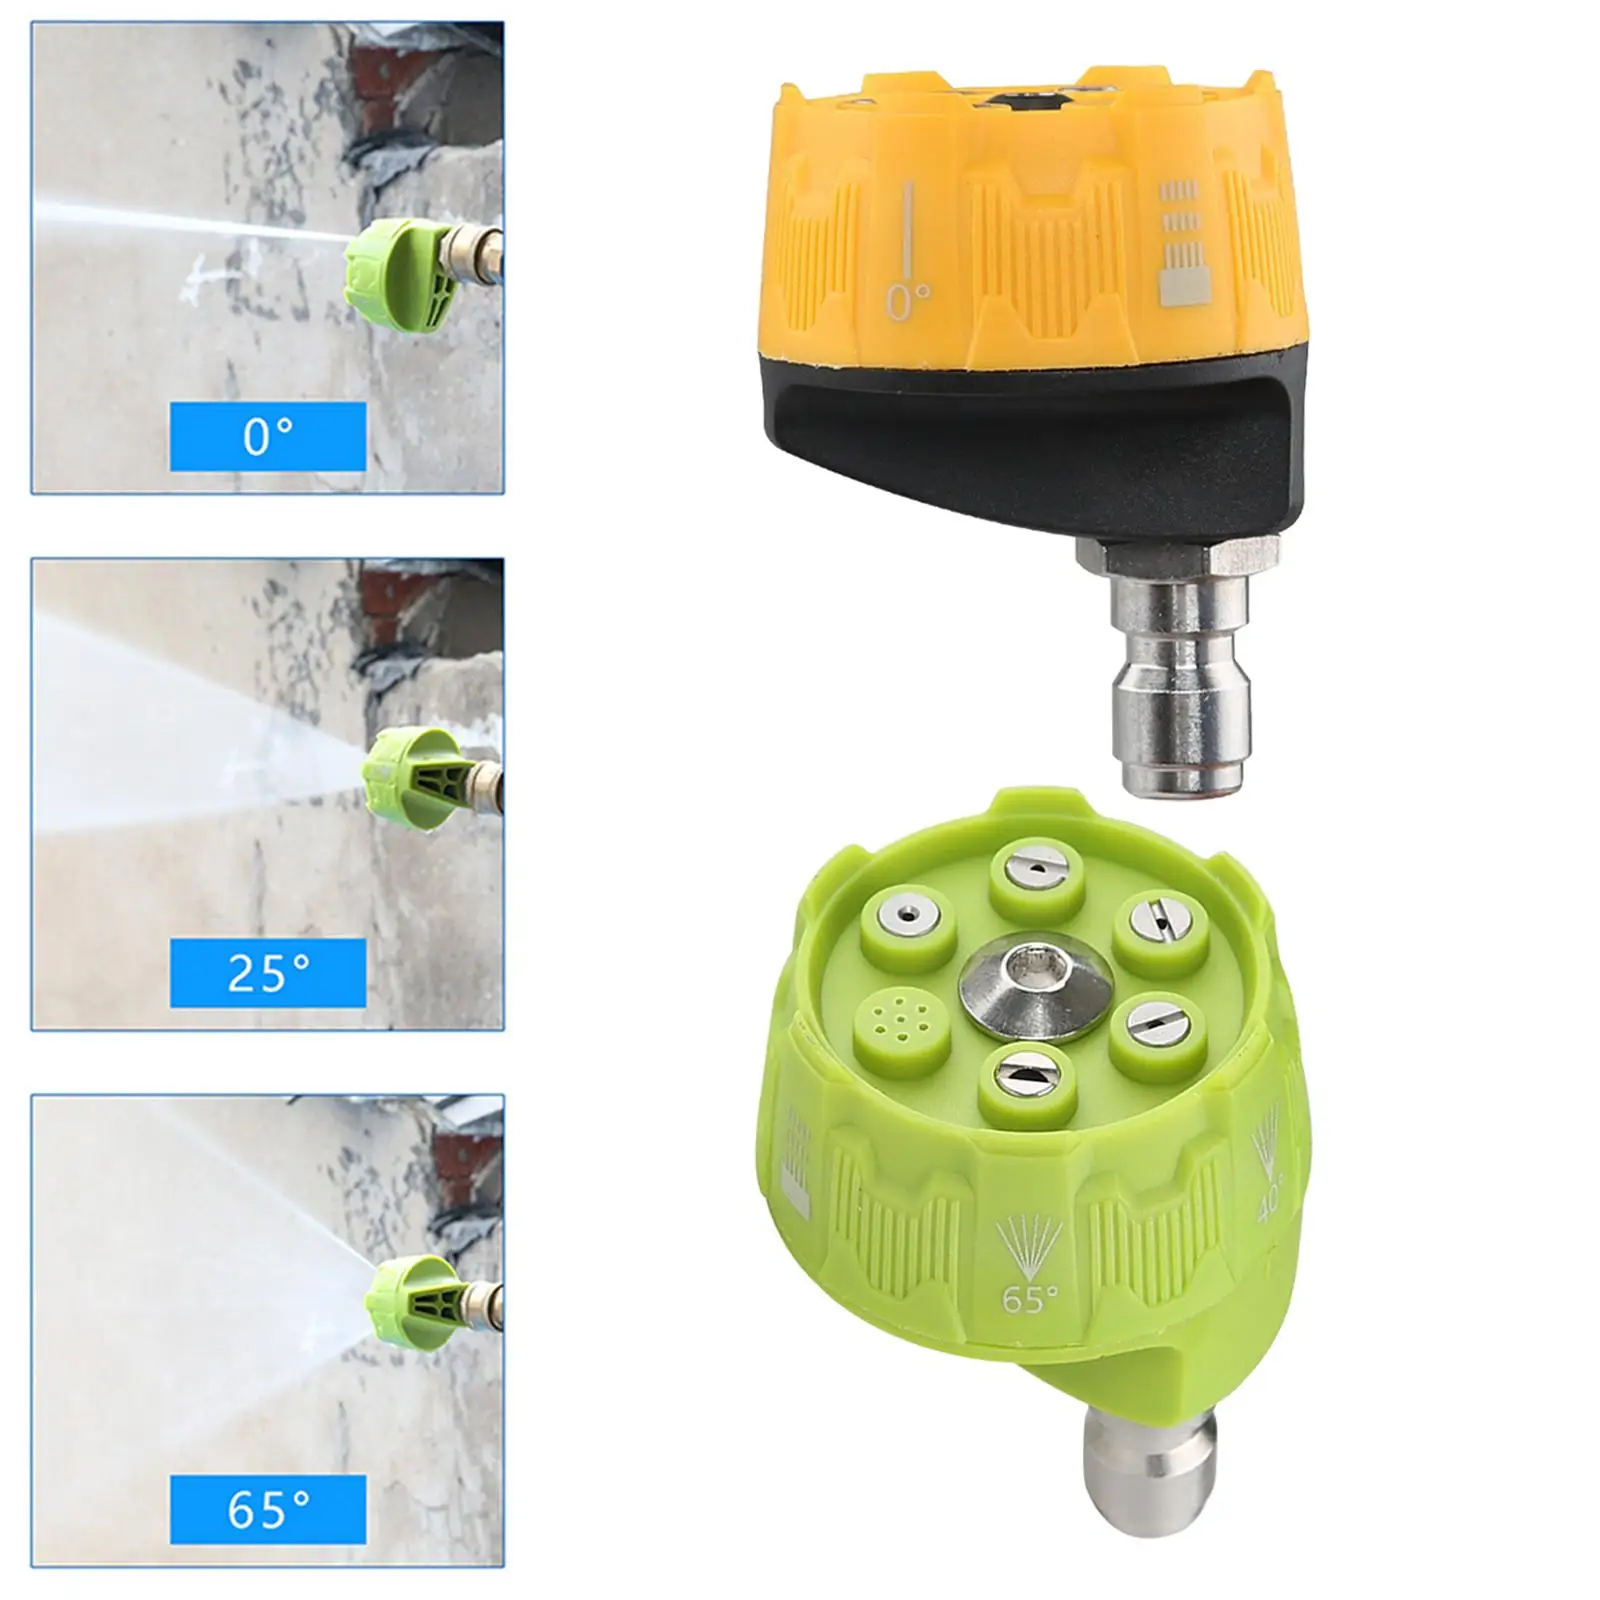 6 in 1 High Pressure Washer Nozzle Connect with 1/4 in Adapter Multi Degree Male Adapter Water Spray Parts for Gutter Cleaning